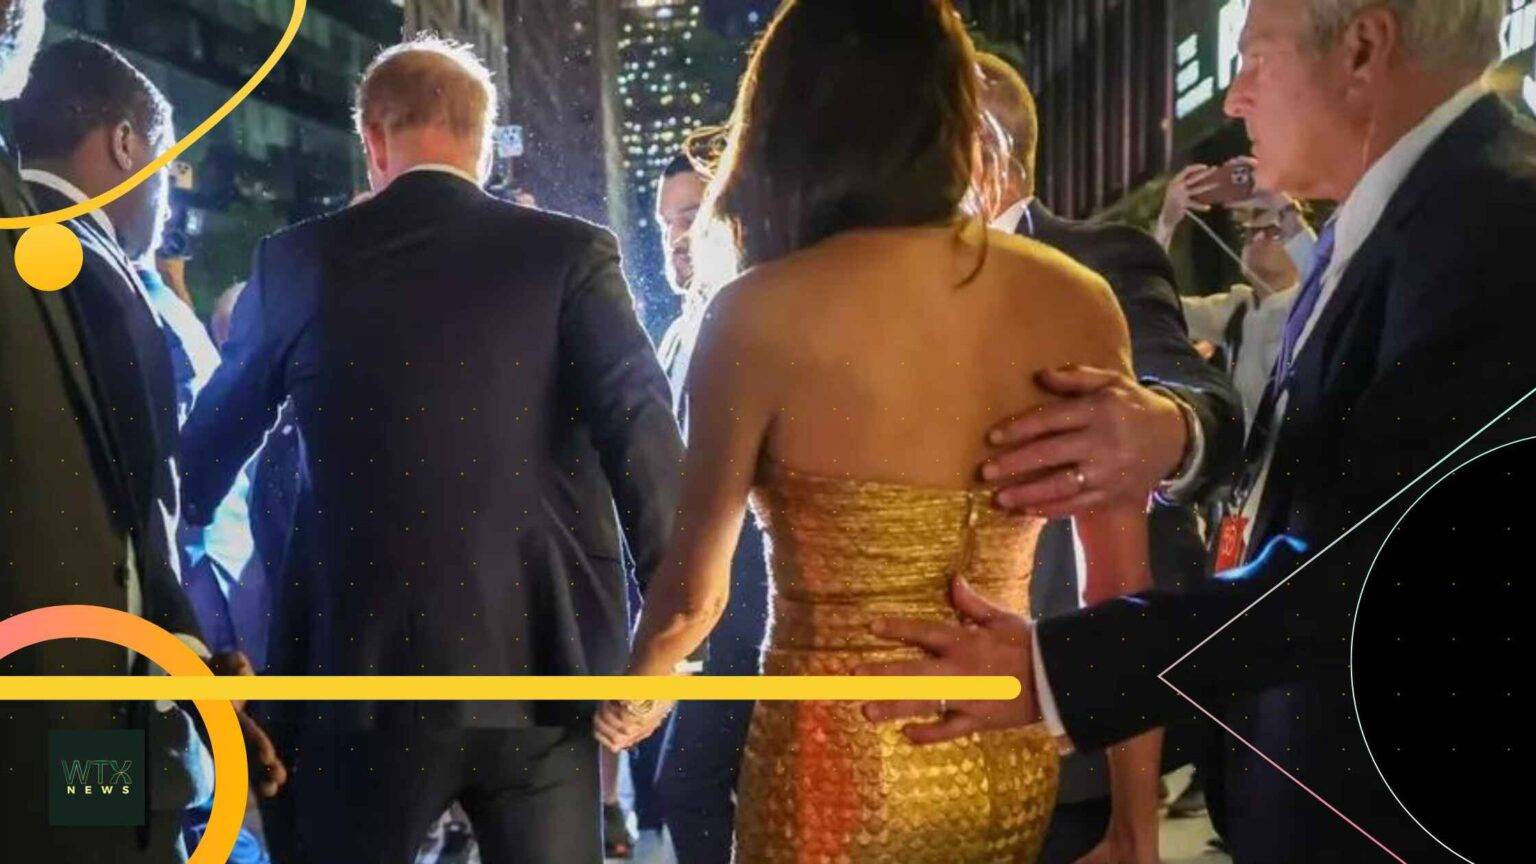 Prince Harry And Meghan: UK Tabloids Are Vile, But America’s Paparazzi Is Just As Toxic